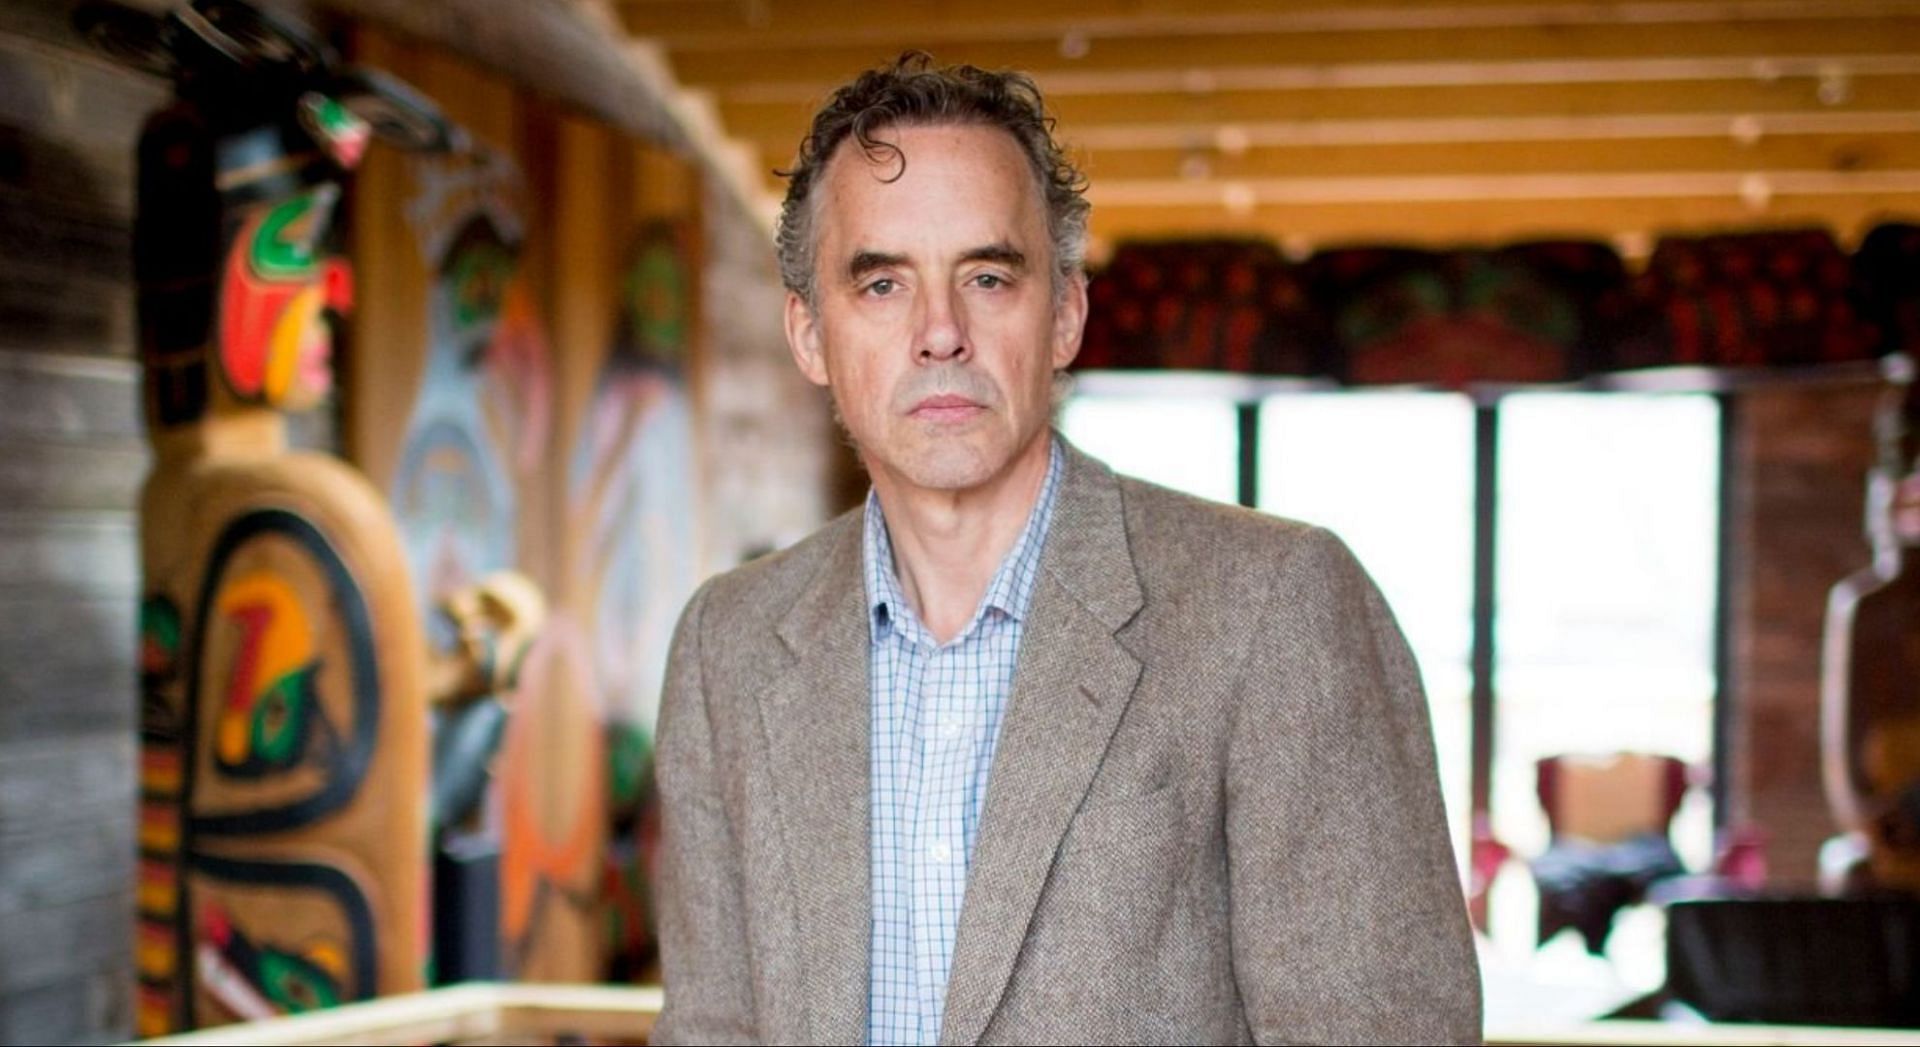 Dr. Jordan Peterson was trolled online after retweeting a misleading controversial video (Image via Getty Images)